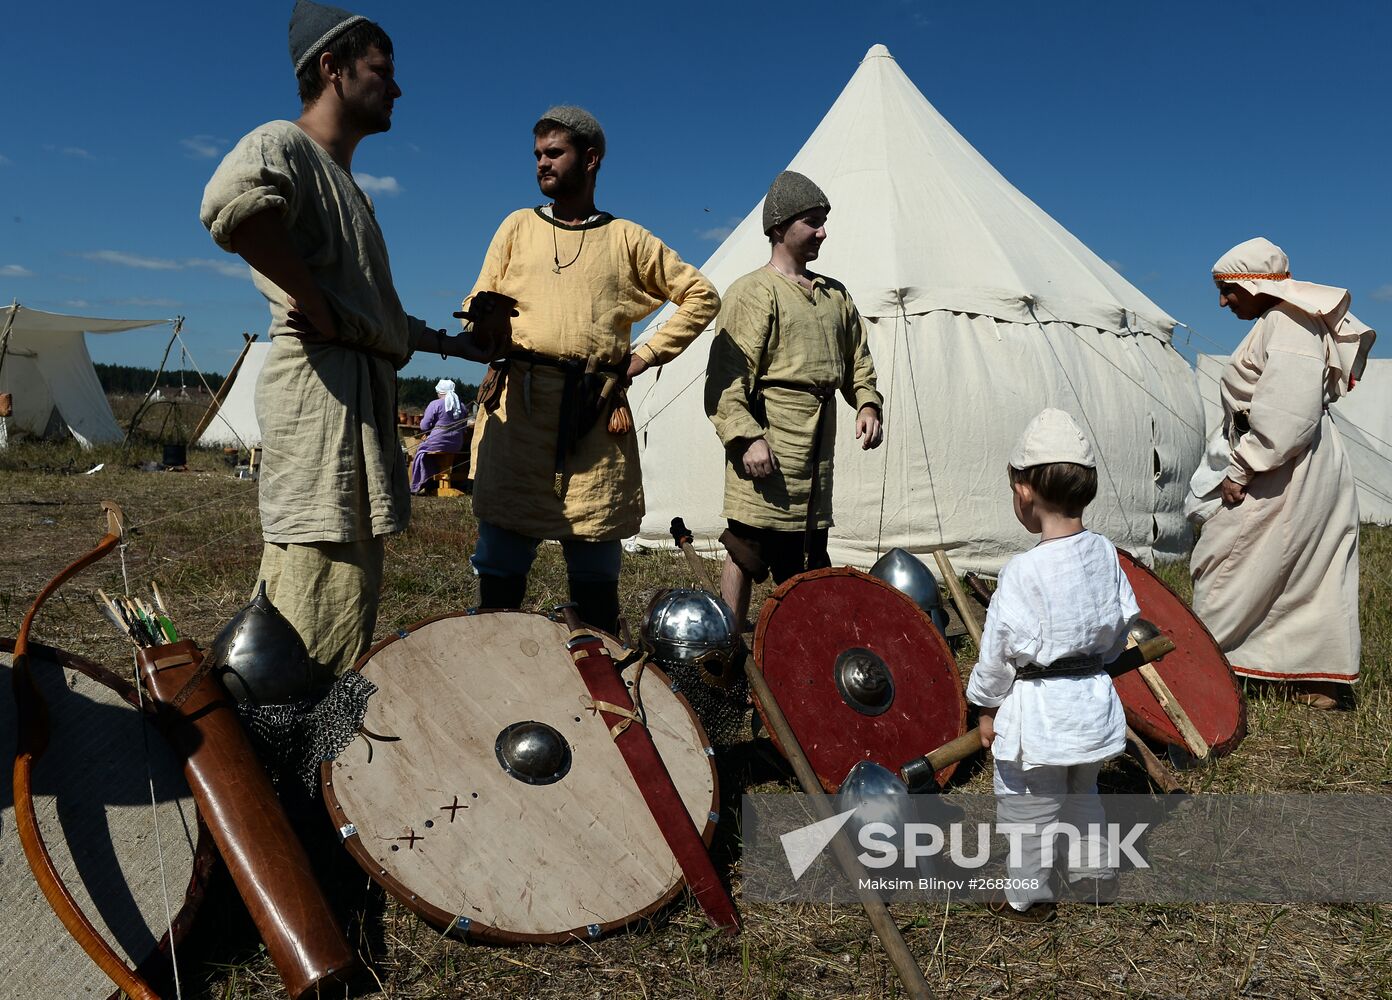 Warrior's Field historical clubs hold 9th festival